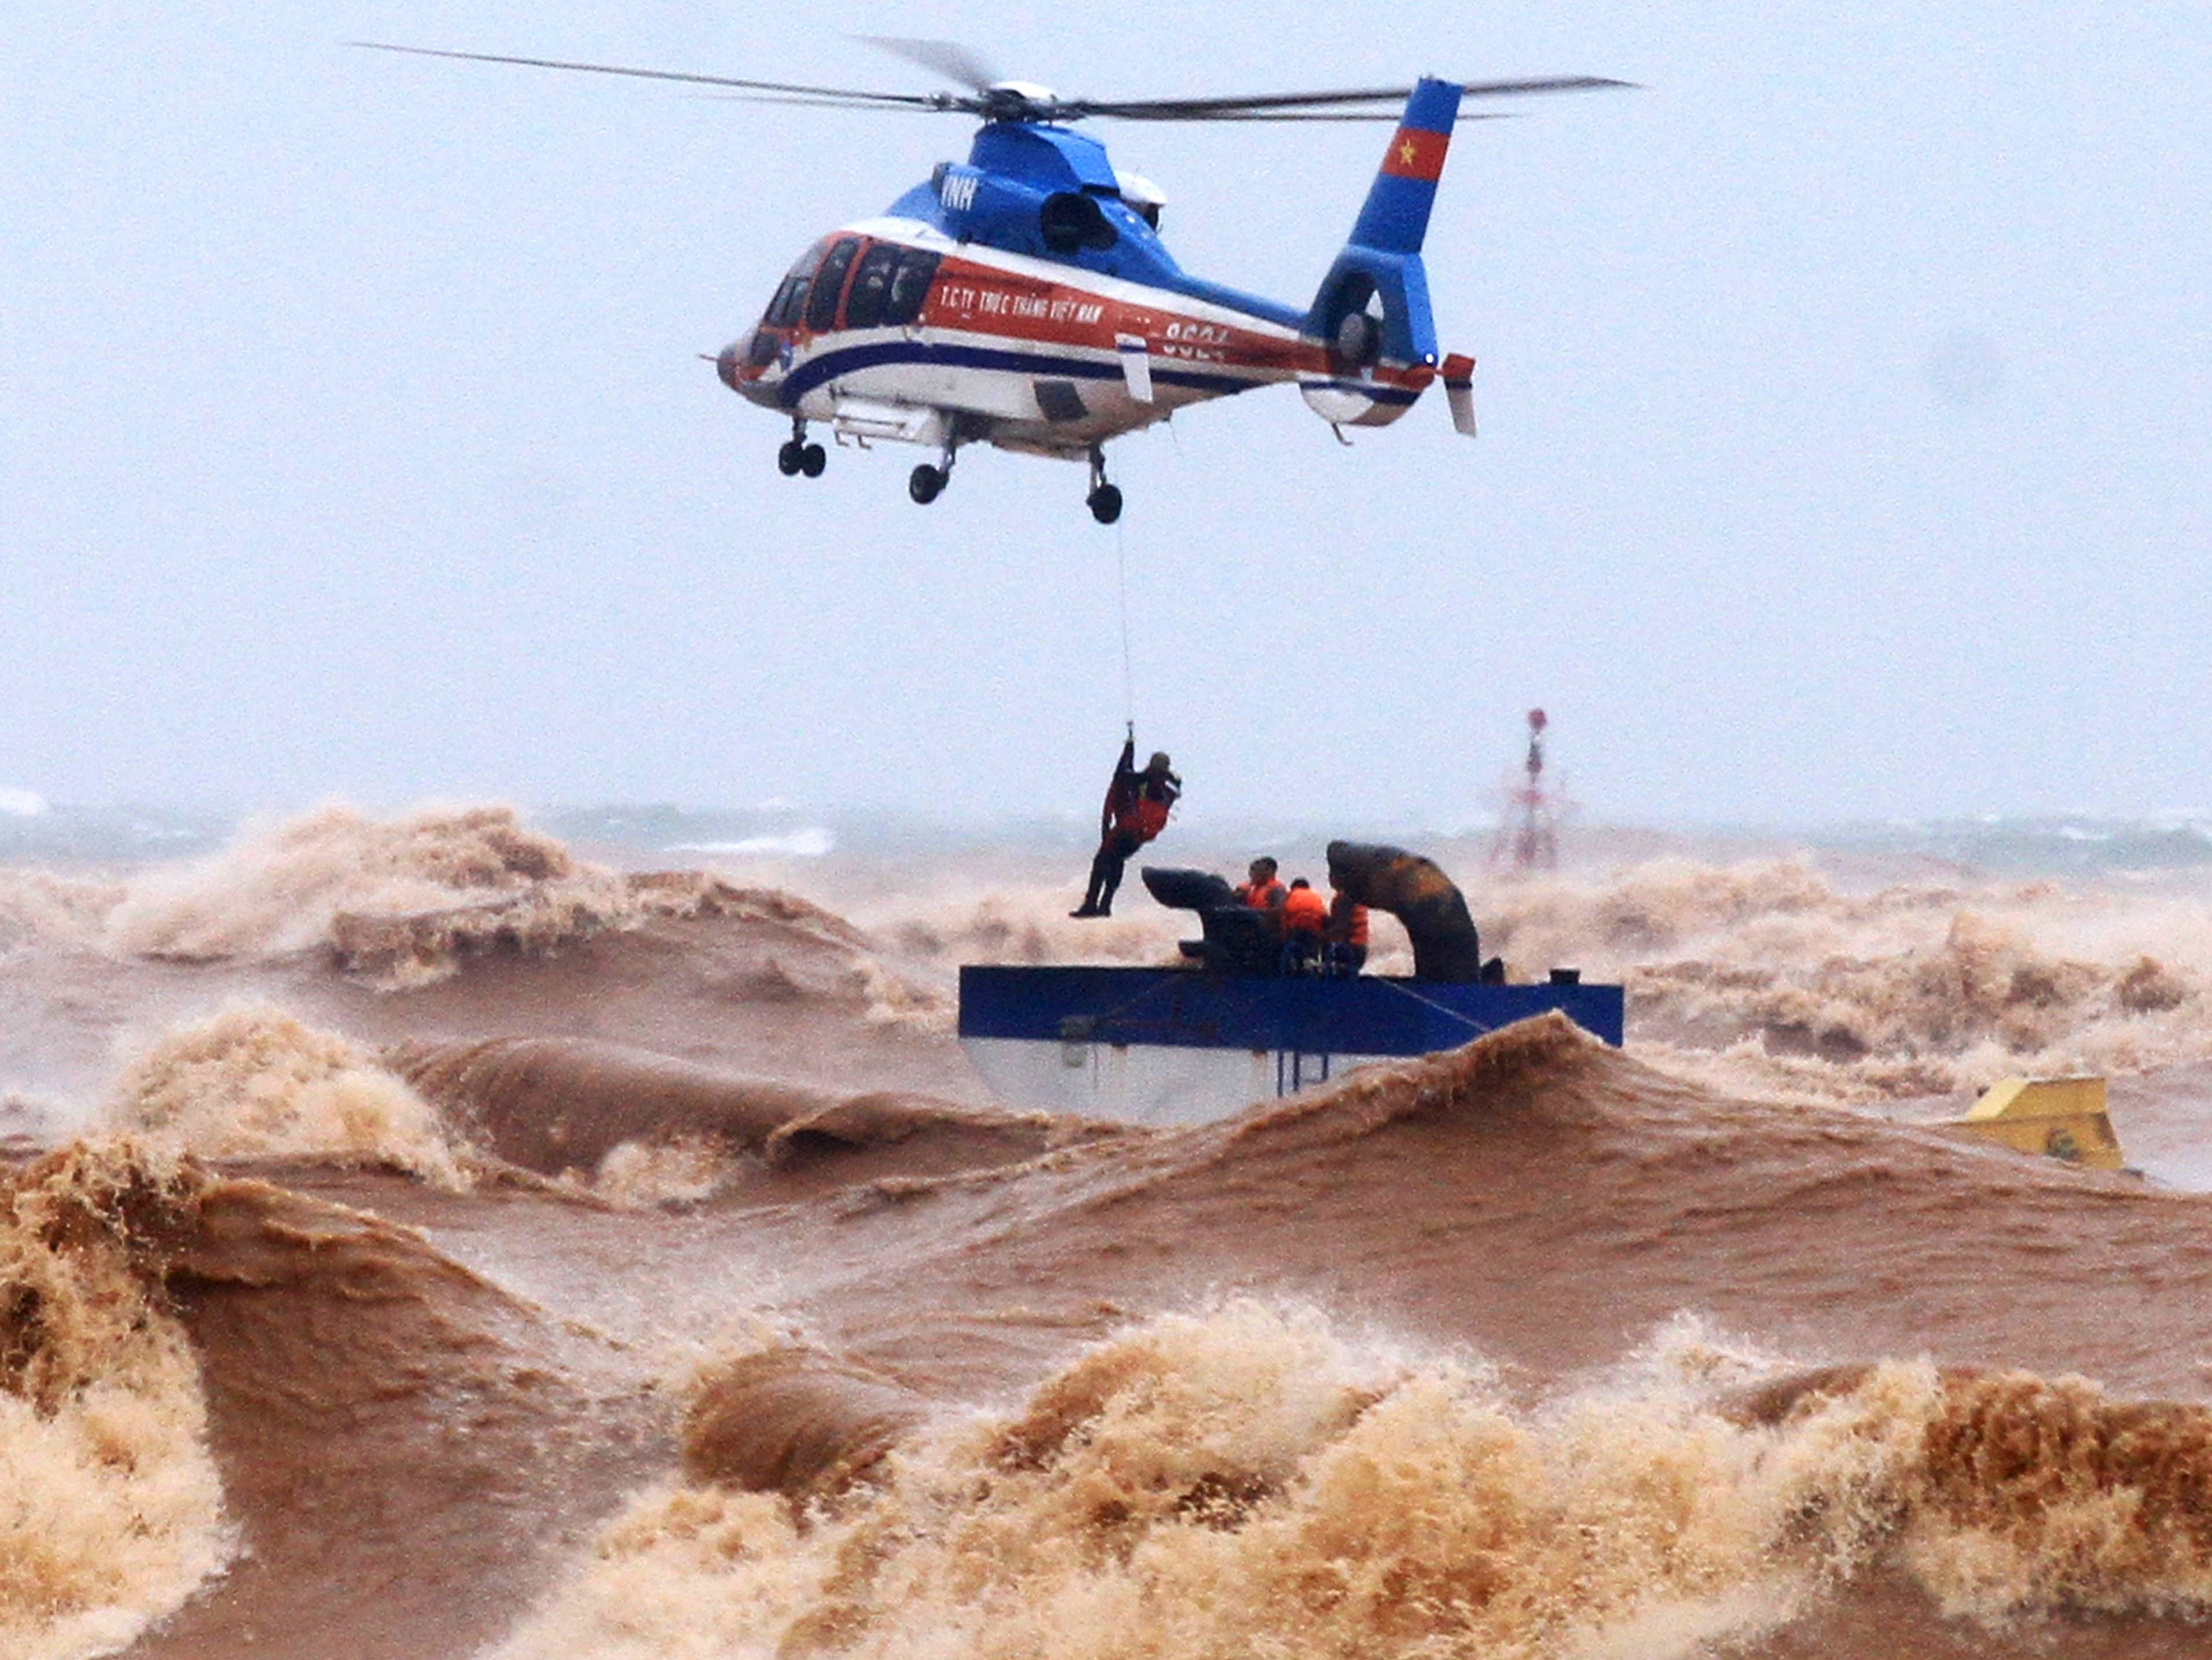 A helicopter crew rescue stranded people from waves in Quang Tri province, Vietnam, on 11 October 2020. Heavy rains and floods killed nine people and left 11 missing during the past few days